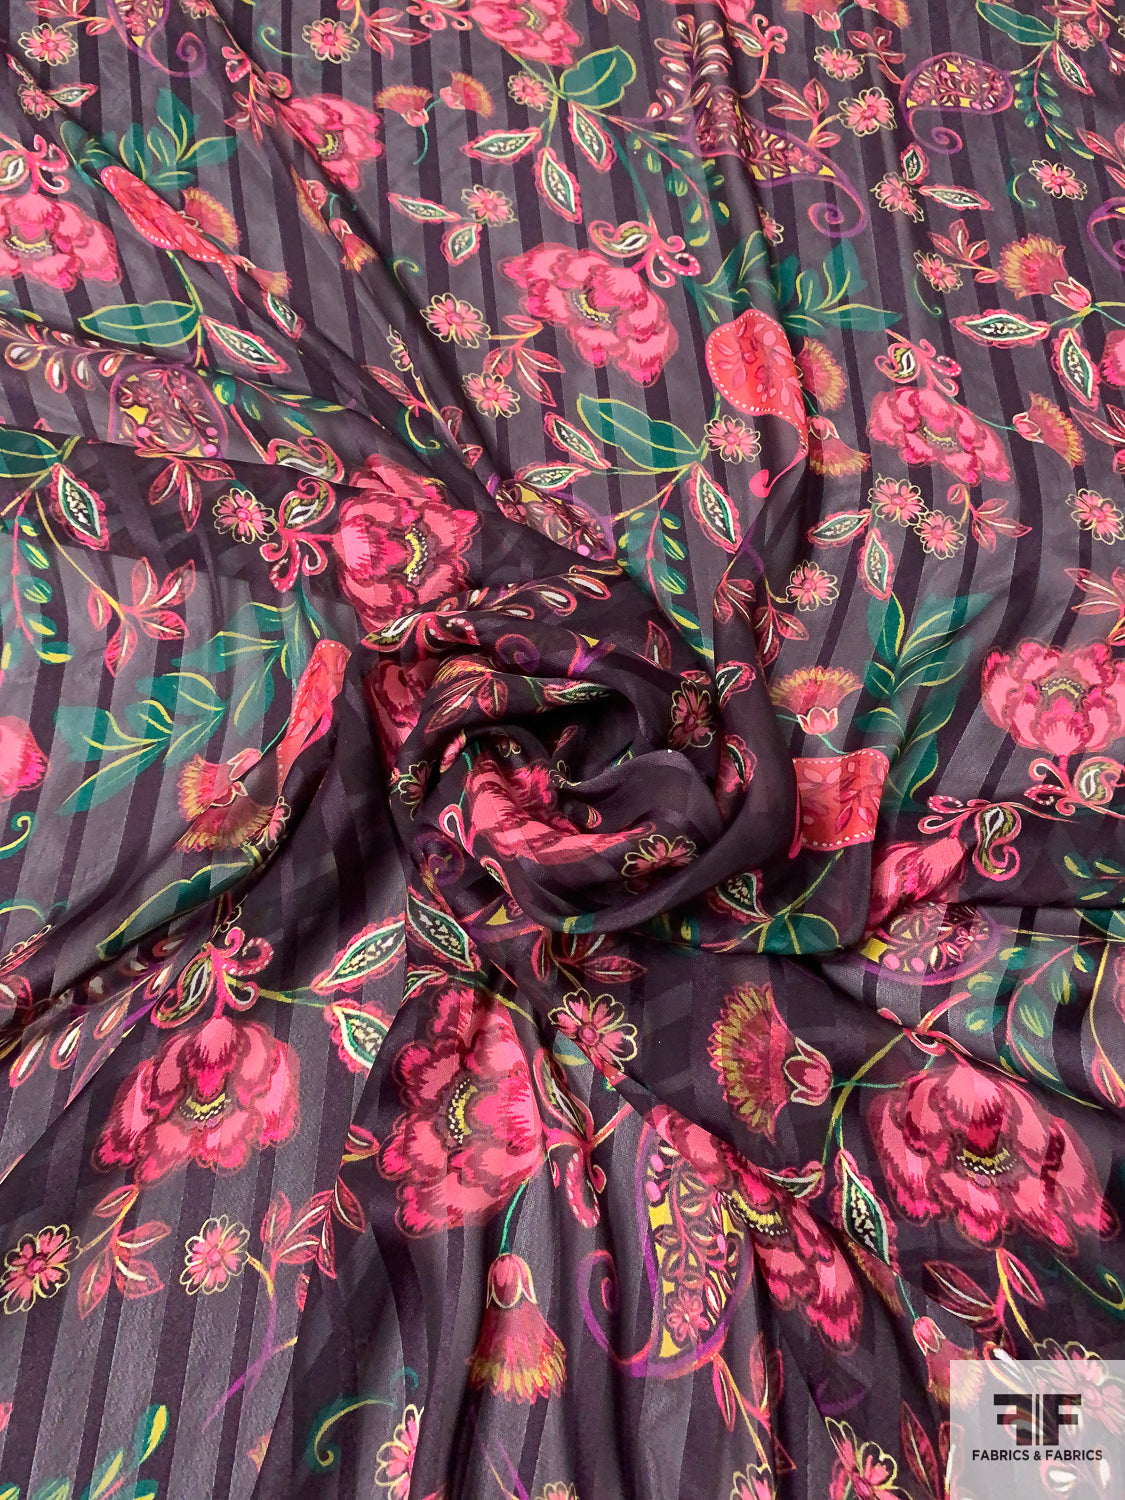 Floral Paisley Printed Shadow Striped Poly Chiffon - Plum / Pink / Green